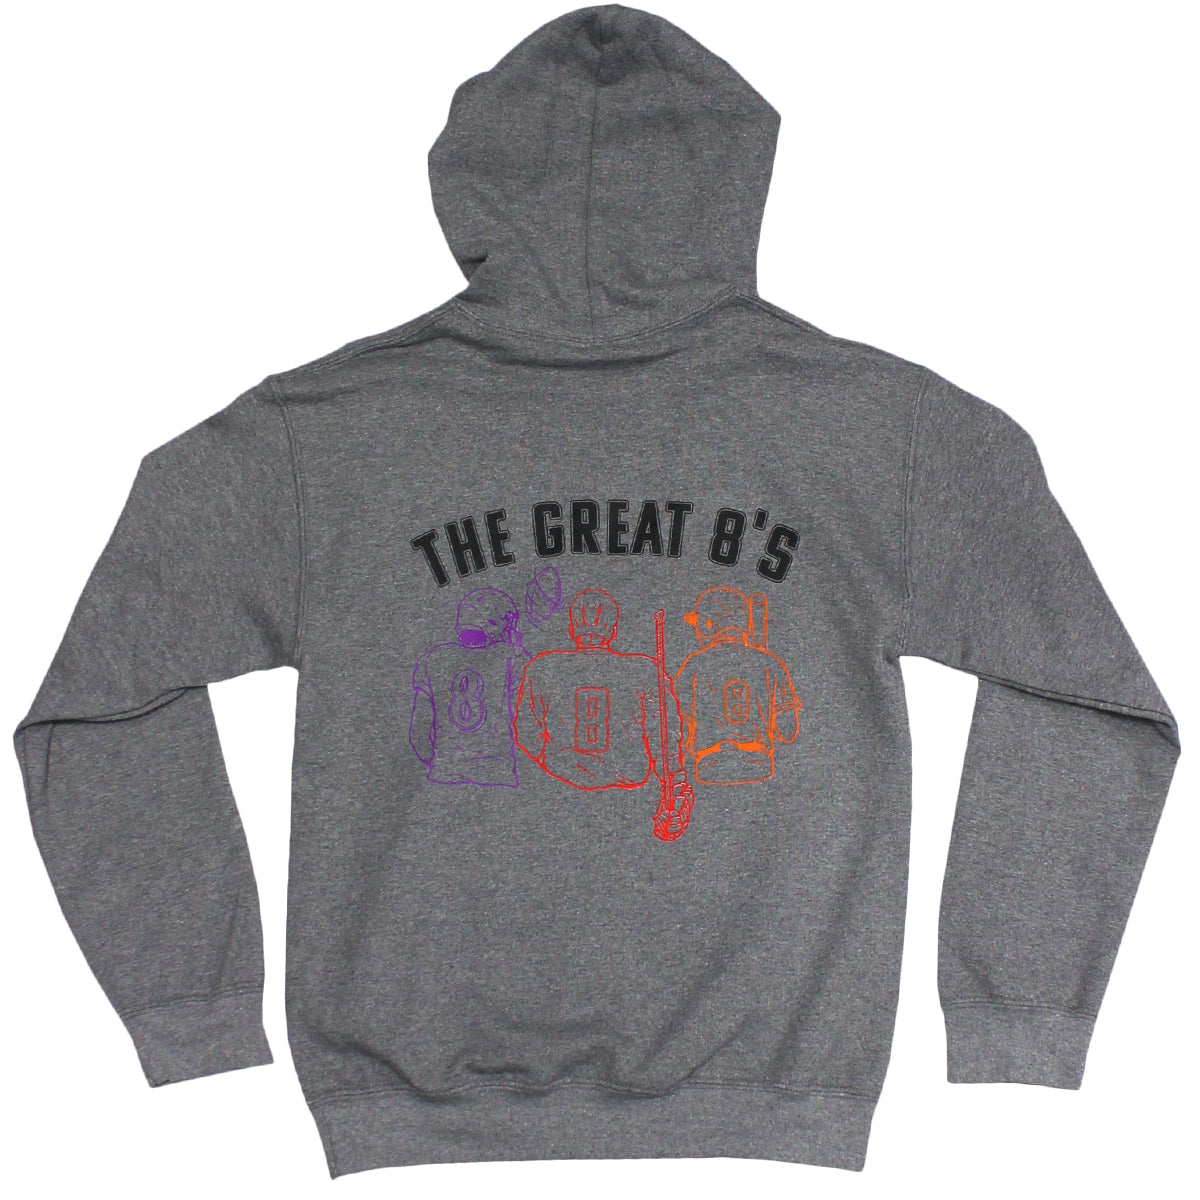 The Great 8's - Maryland Edition (Grey) / Hoodie - Route One Apparel